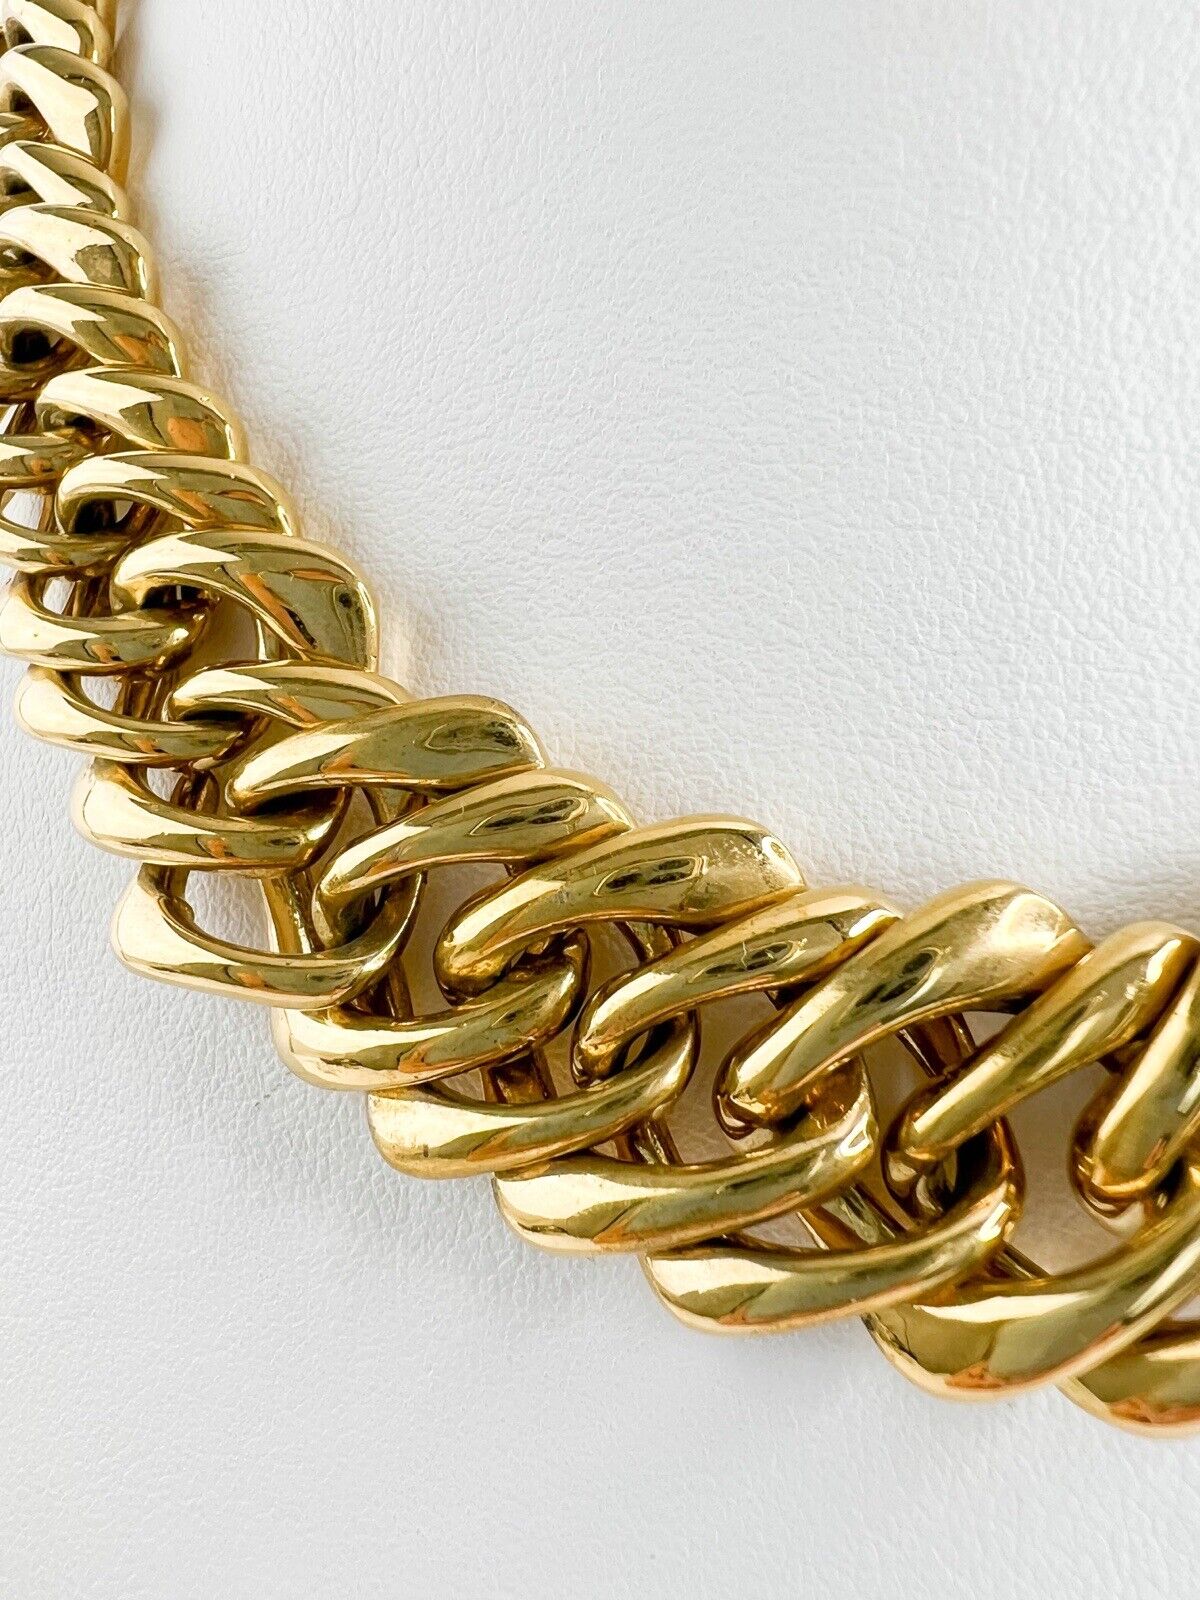 Vintage YSL Yves Saint Laurent Necklace, Choker Necklace gold, Vintage Necklace, Massive Chunky Chain, Gift for her, Chain Necklace